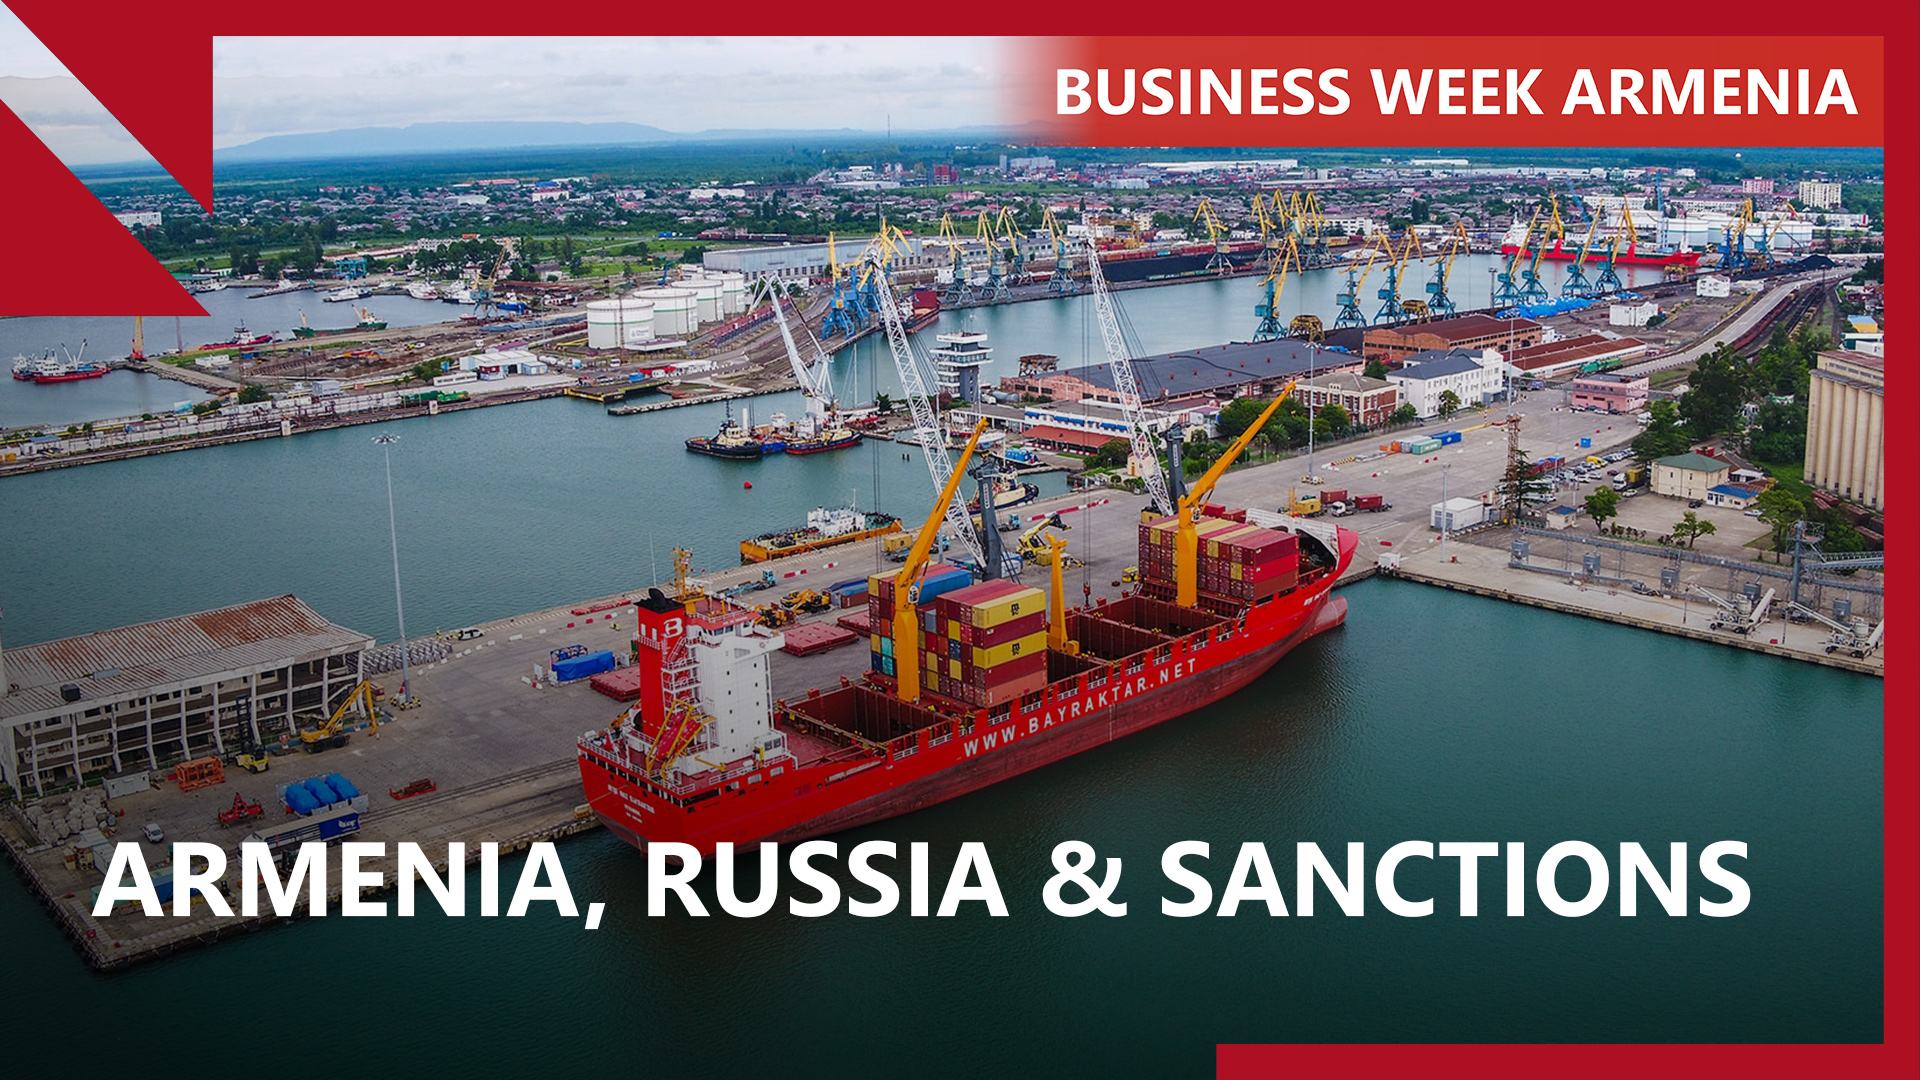 Armenia working to comply with Russia sanctions: THIS WEEK IN BUSINESS